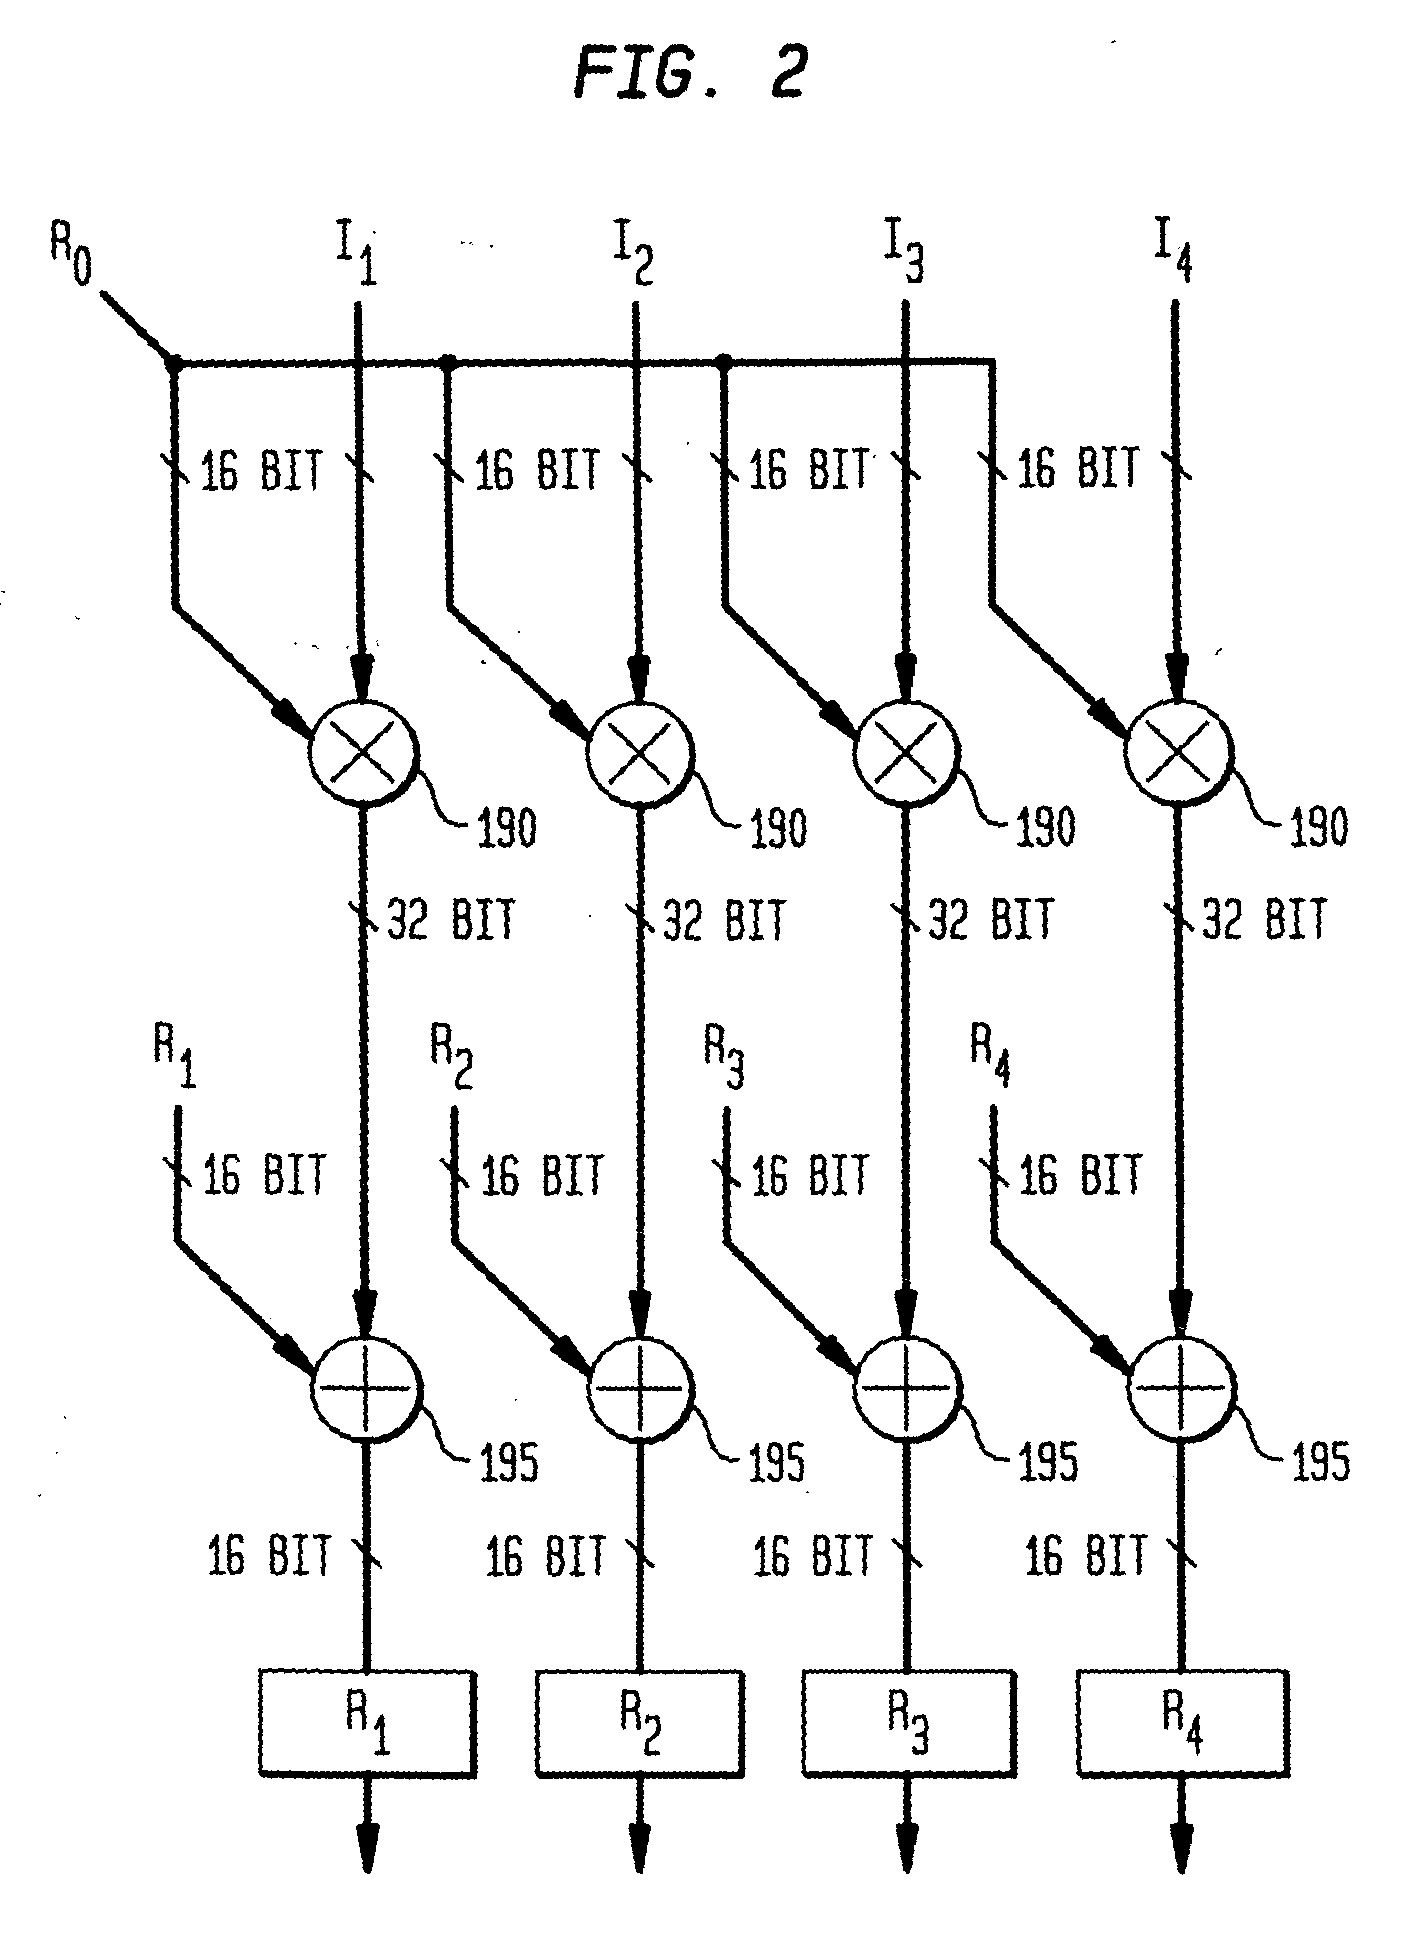 Data flow control for adaptive integrated circuitry